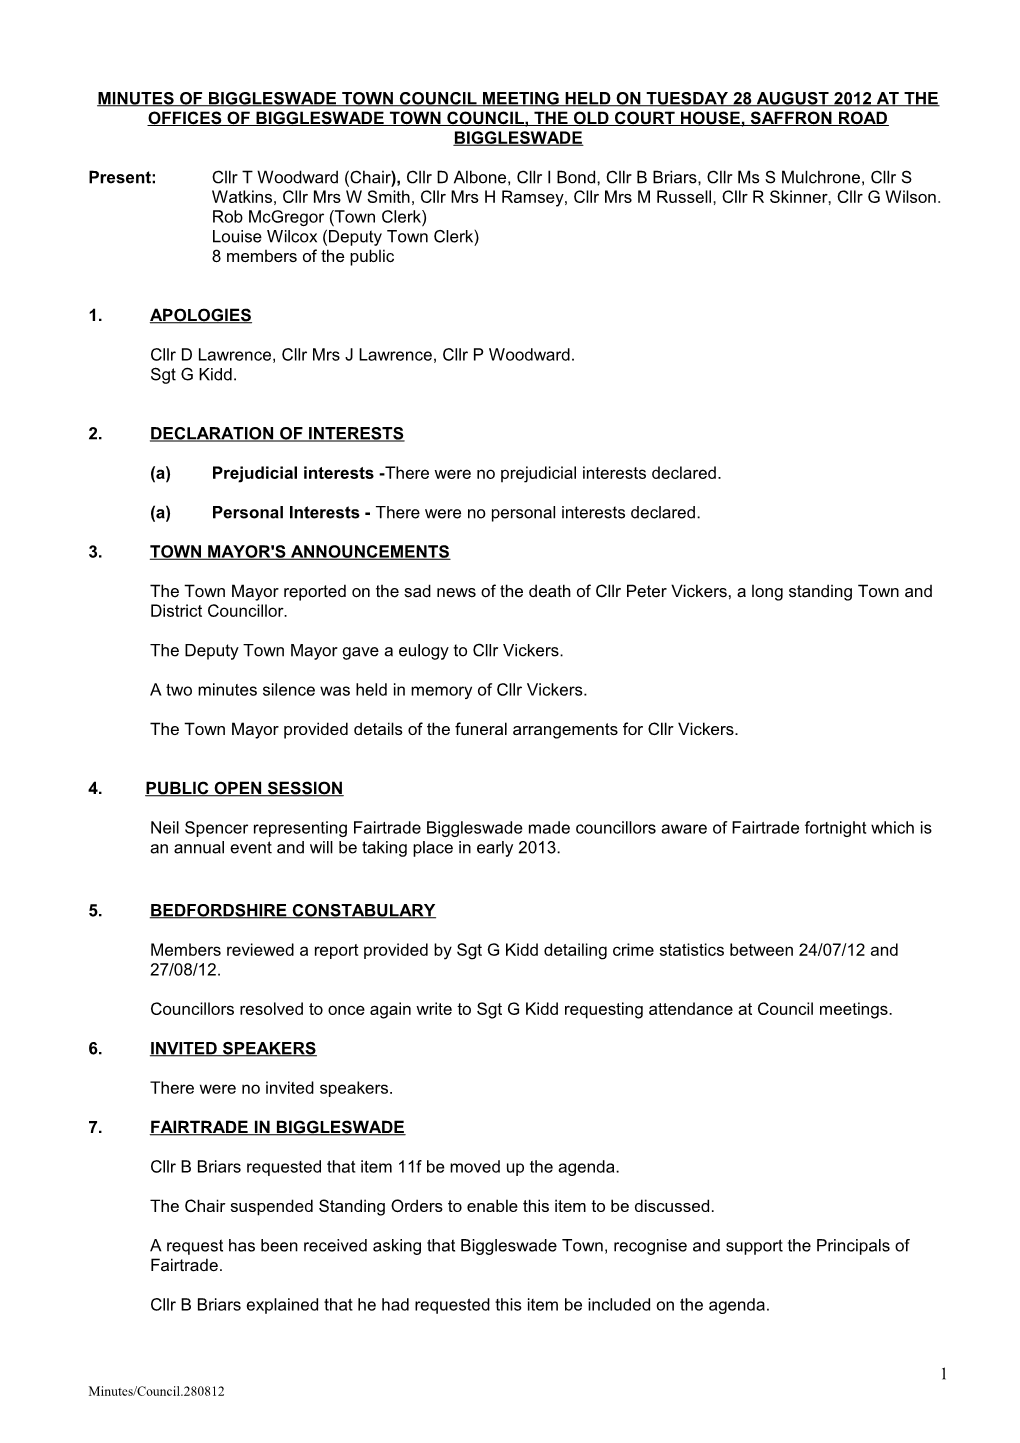 MINUTES of BIGGLESWADE TOWN COUNCIL MEETING HELD on TUESDAY 27Th FEBRUARY 2007 at the OFFICES